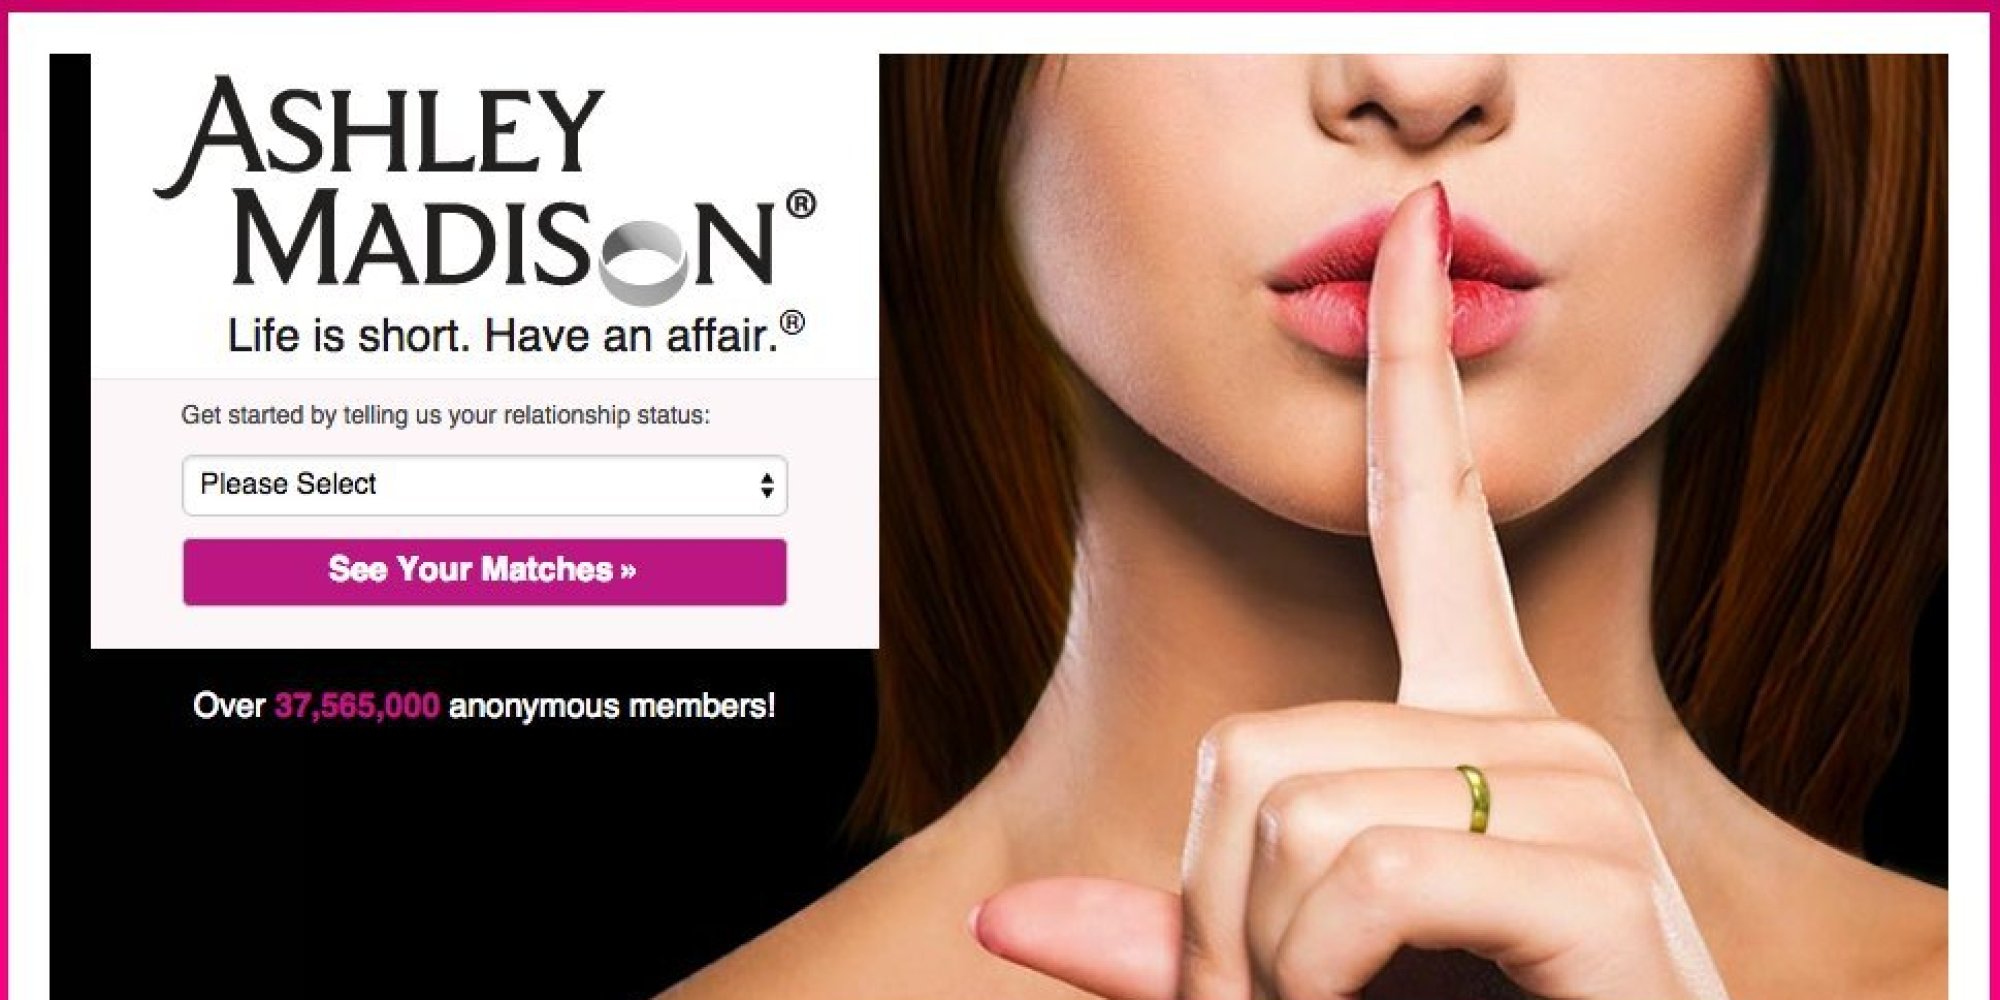 Hacker Group Threatens To Leak Personal Info From Ashley Madison Users